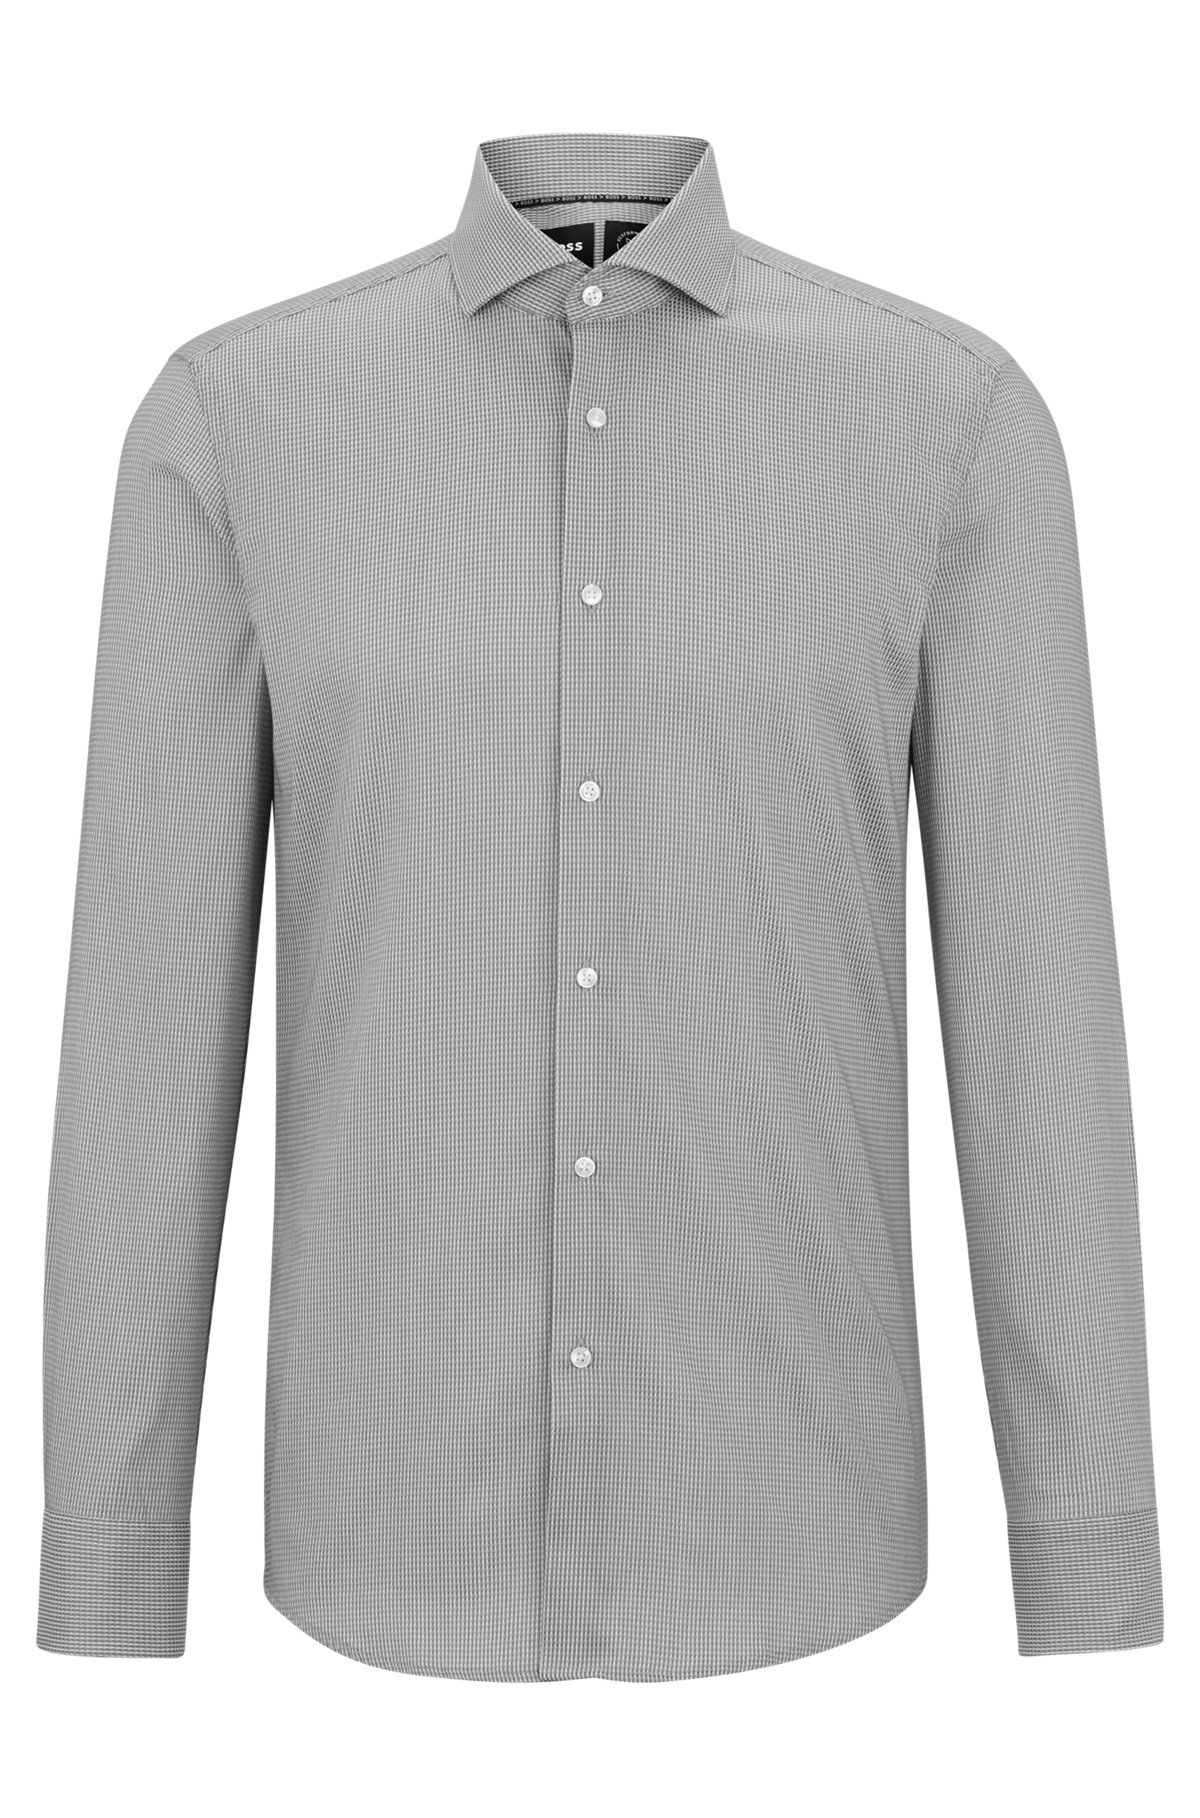 Slim-fit shirt in patterned performance-stretch fabric, Silver